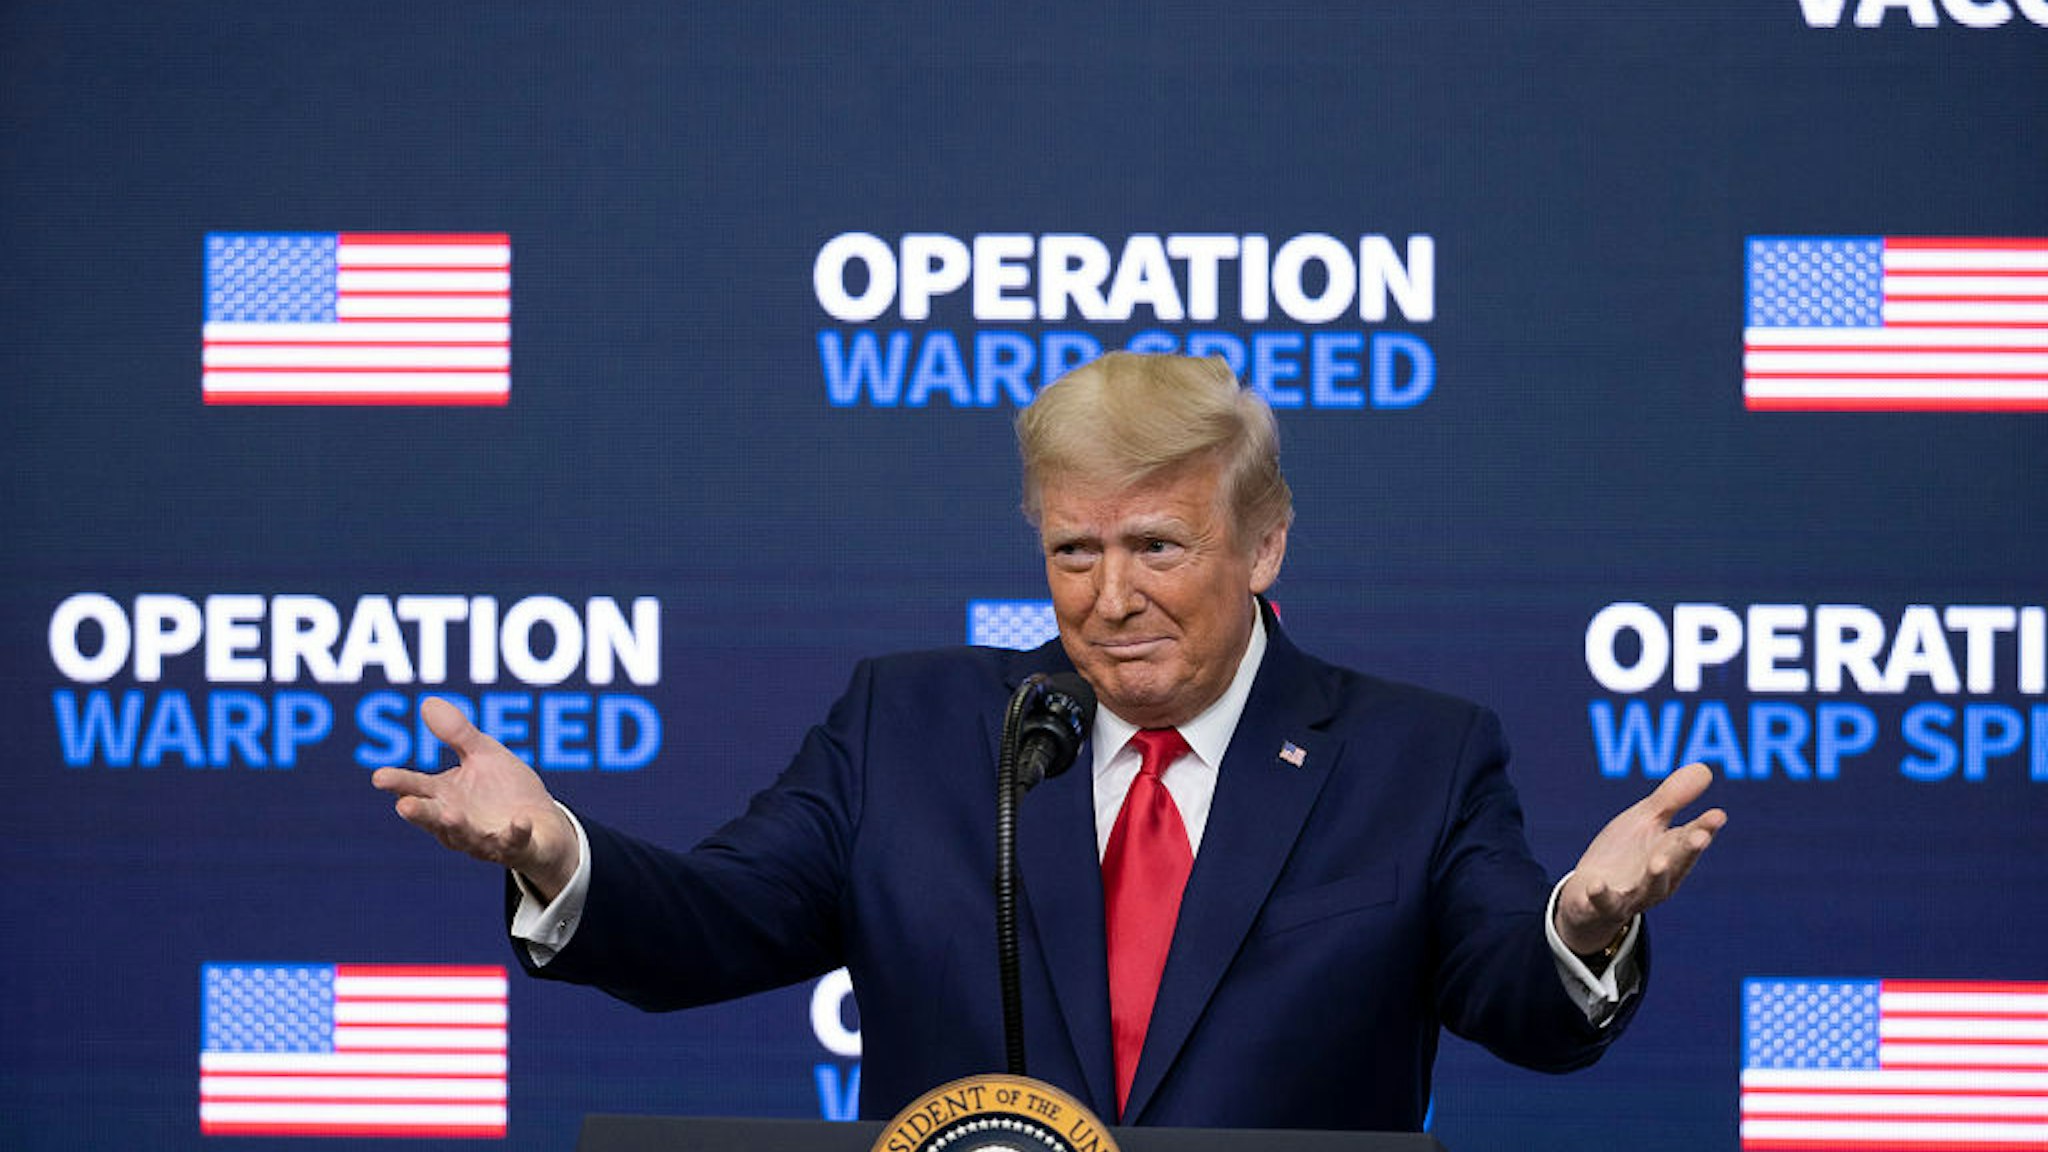 WASHINGTON, DC - DECEMBER 08: US President Donald Trump speaks at the Operation Warp Speed Vaccine Summit on December 08, 2020 in Washington, DC. The president signed an executive order stating the US would provide vaccines to Americans before aiding other nations.